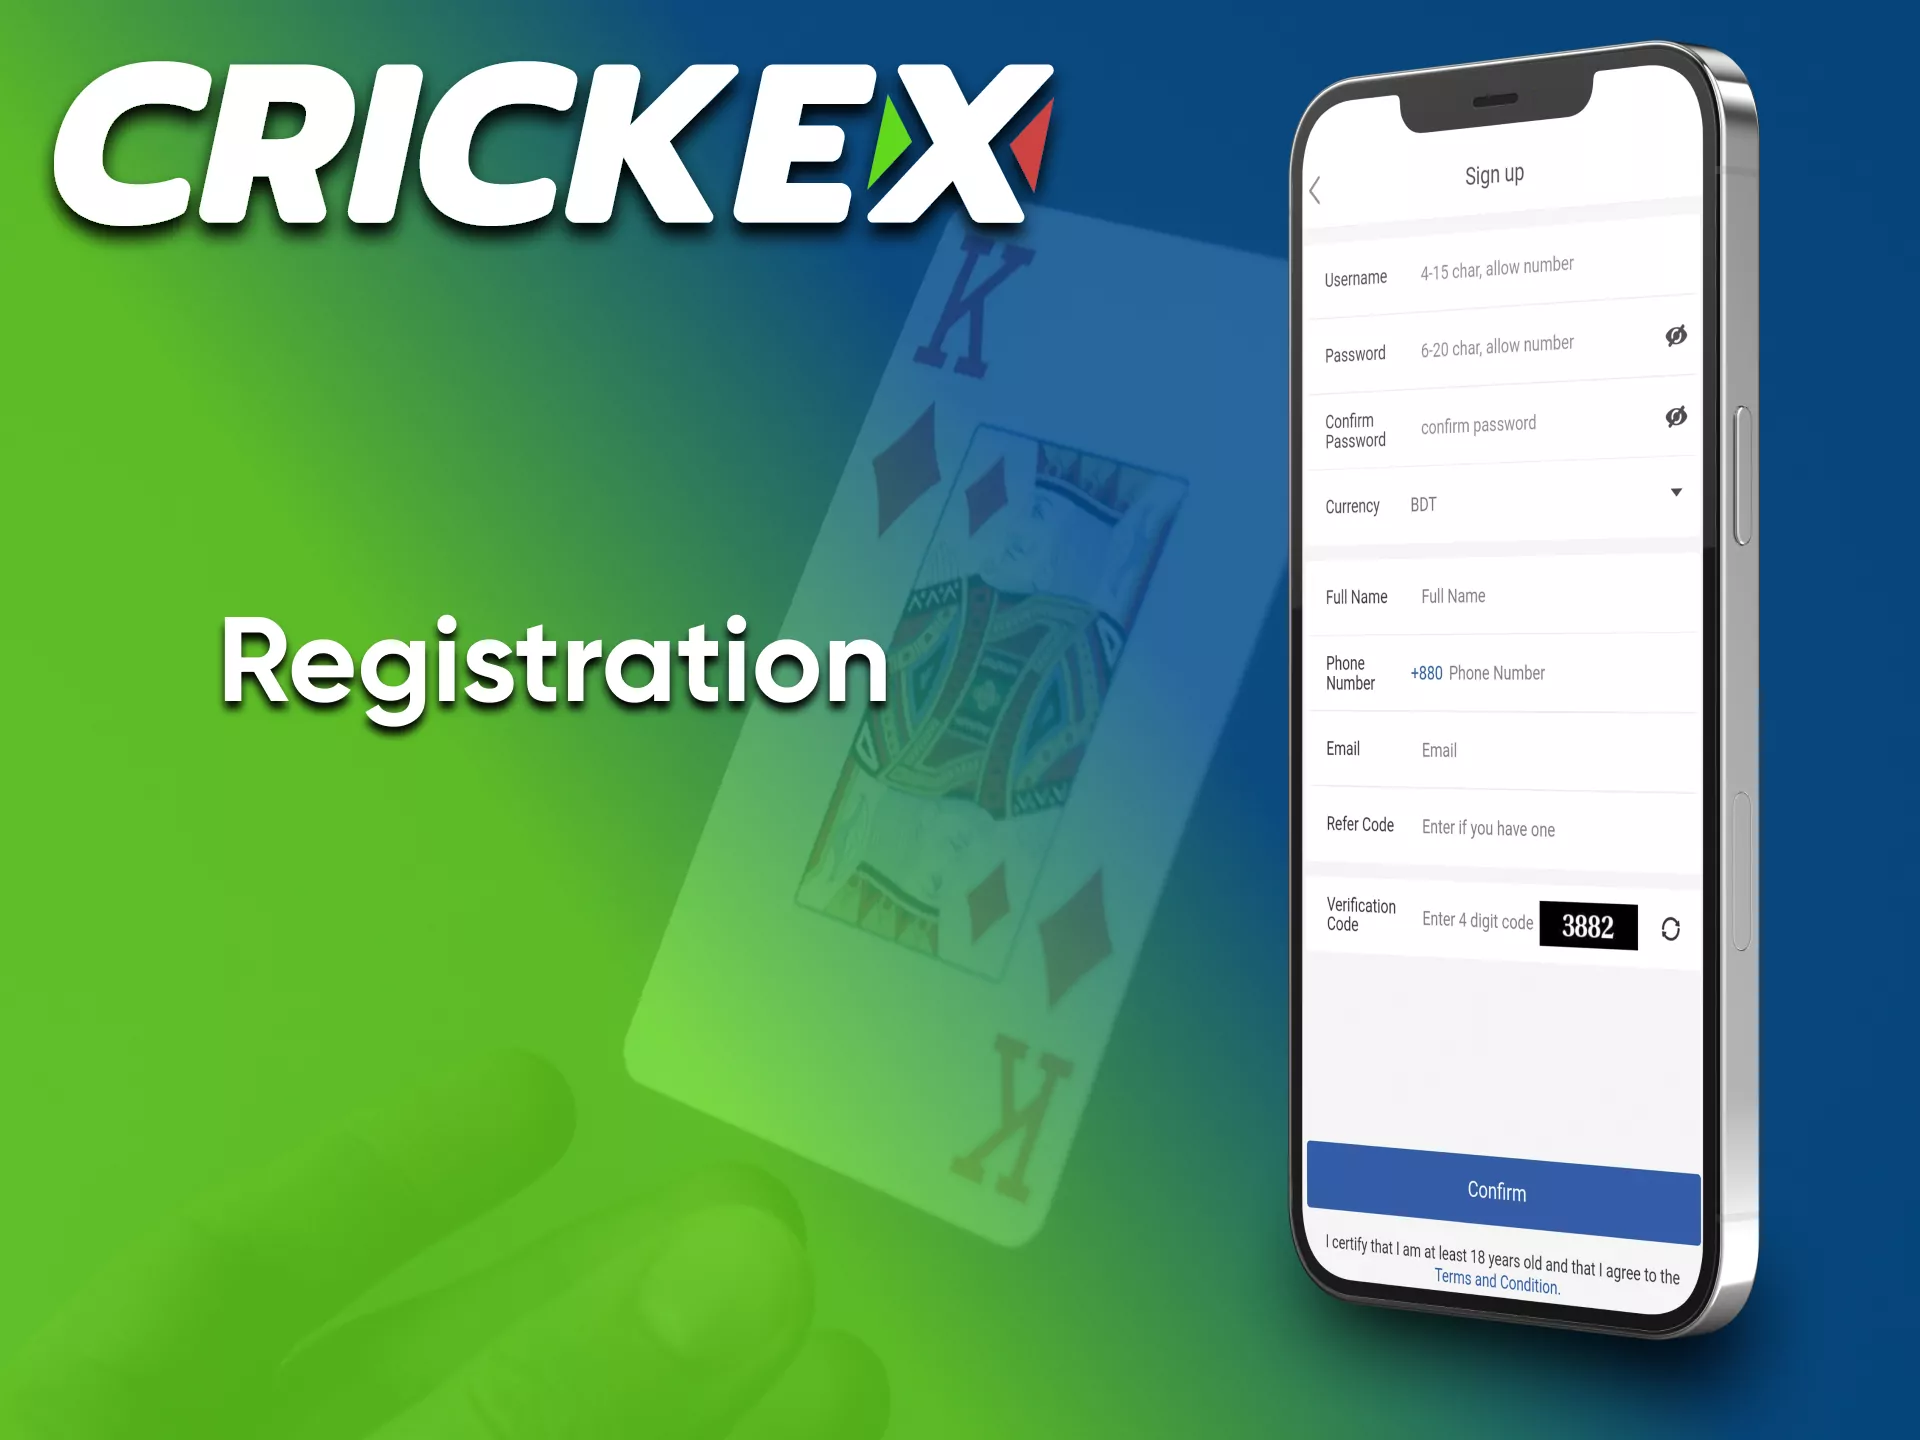 Sign up to play at Crickex casino.